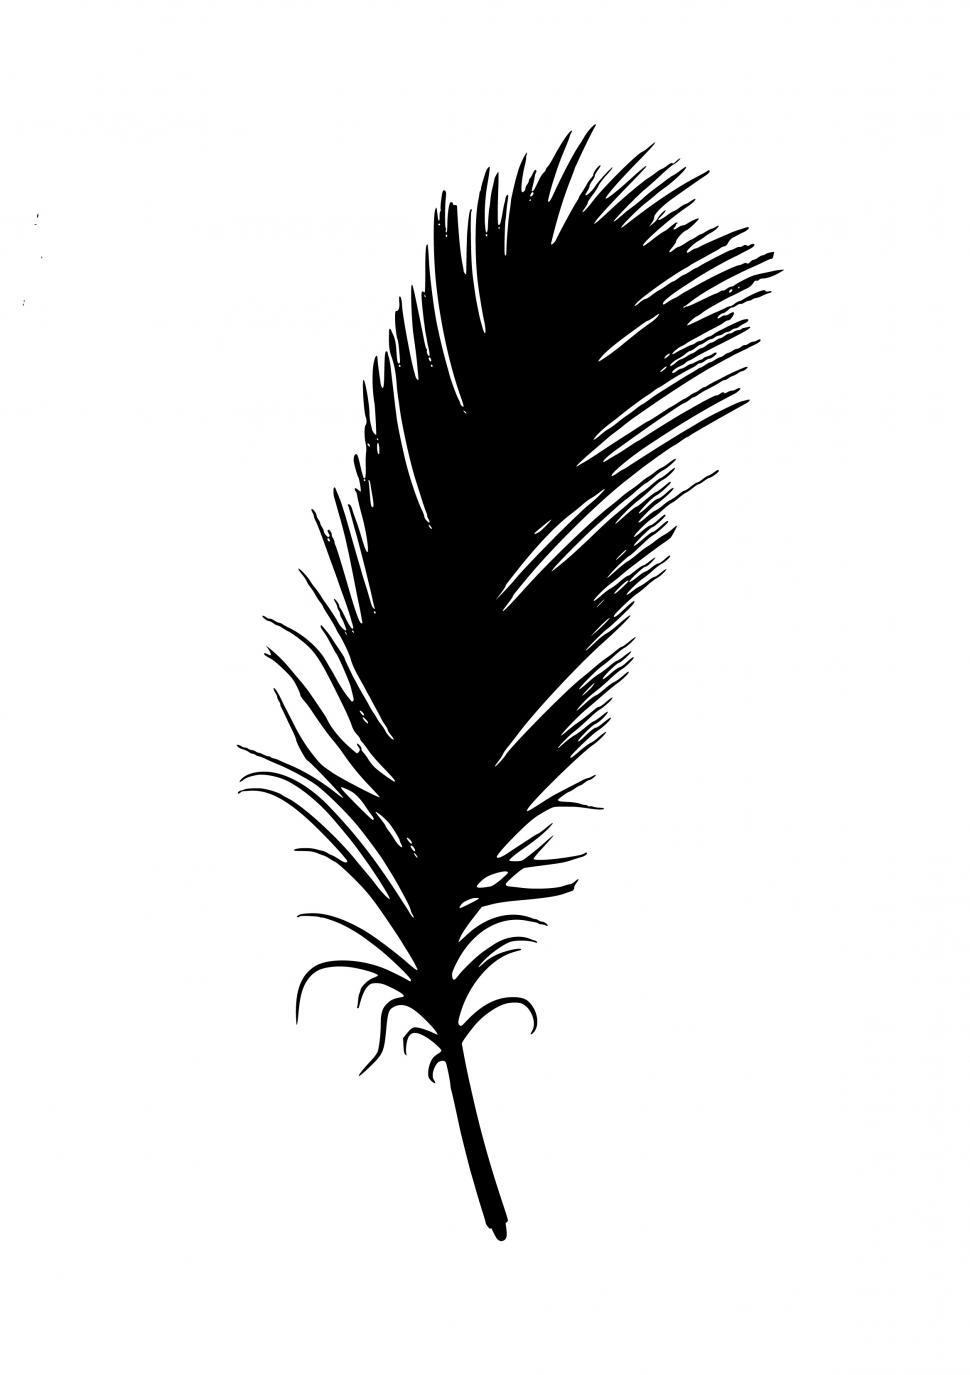 Free Image of feather Black Silhouette  